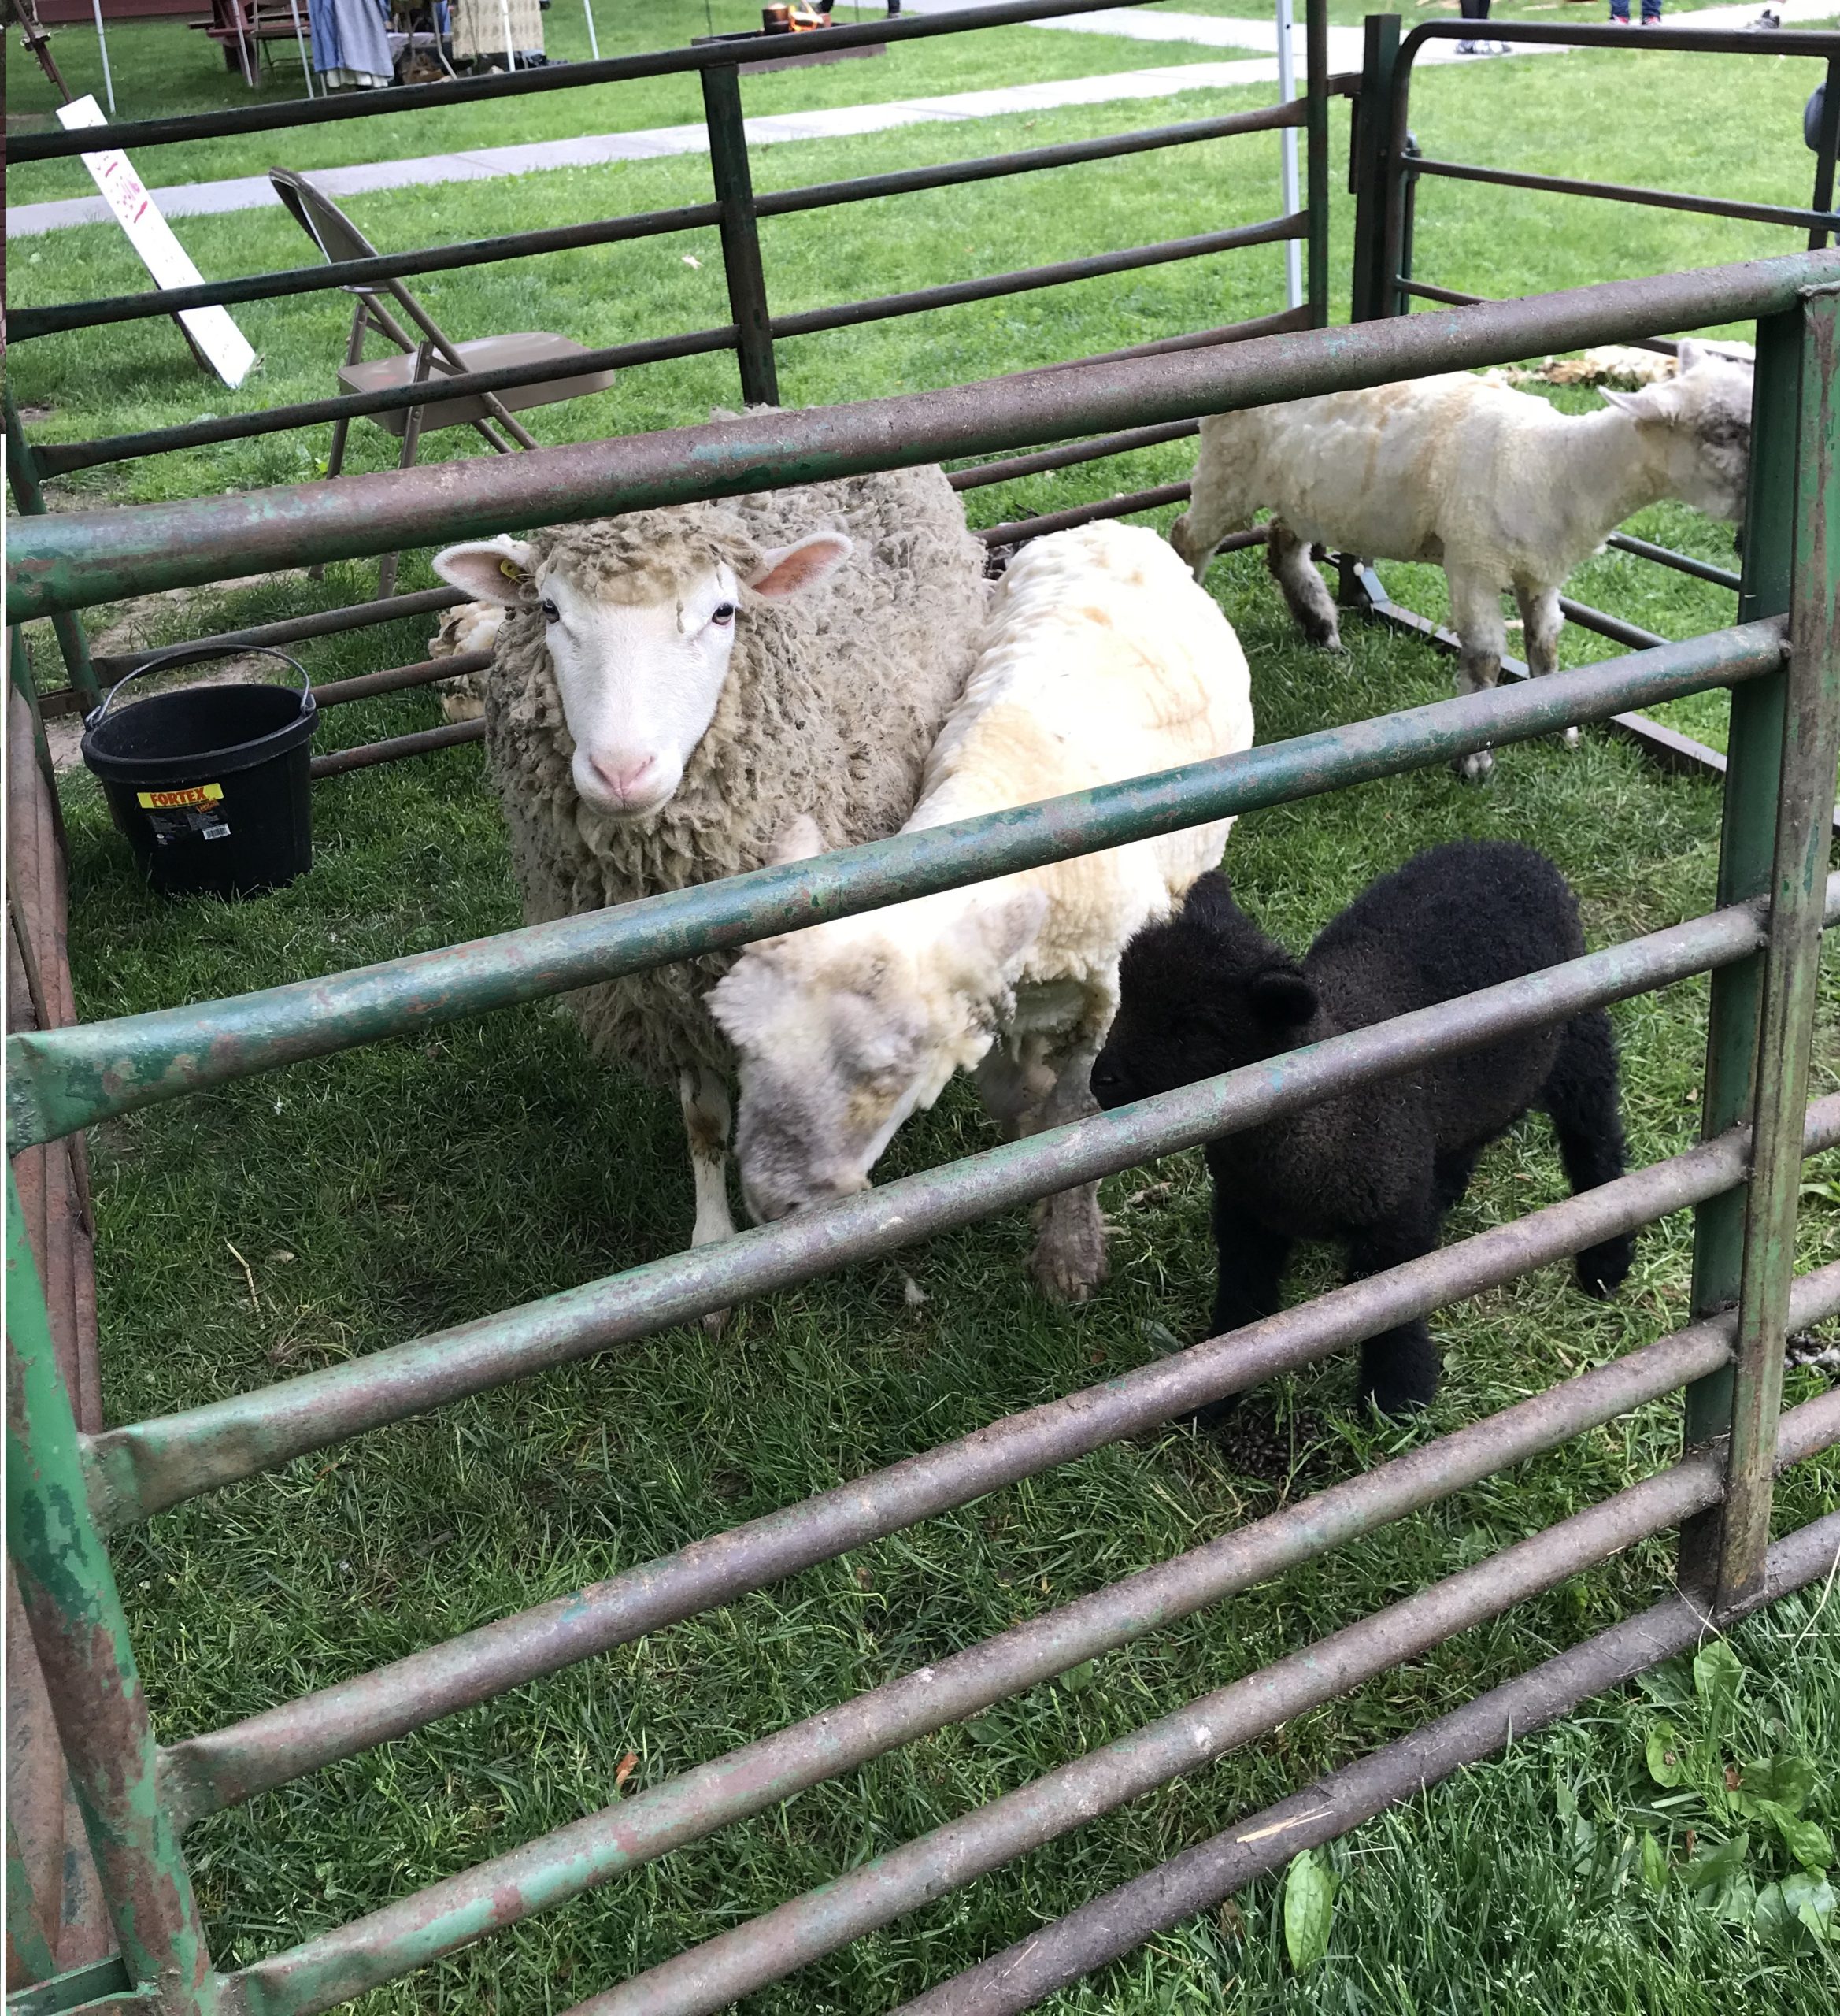 sheep and lambs in a pen